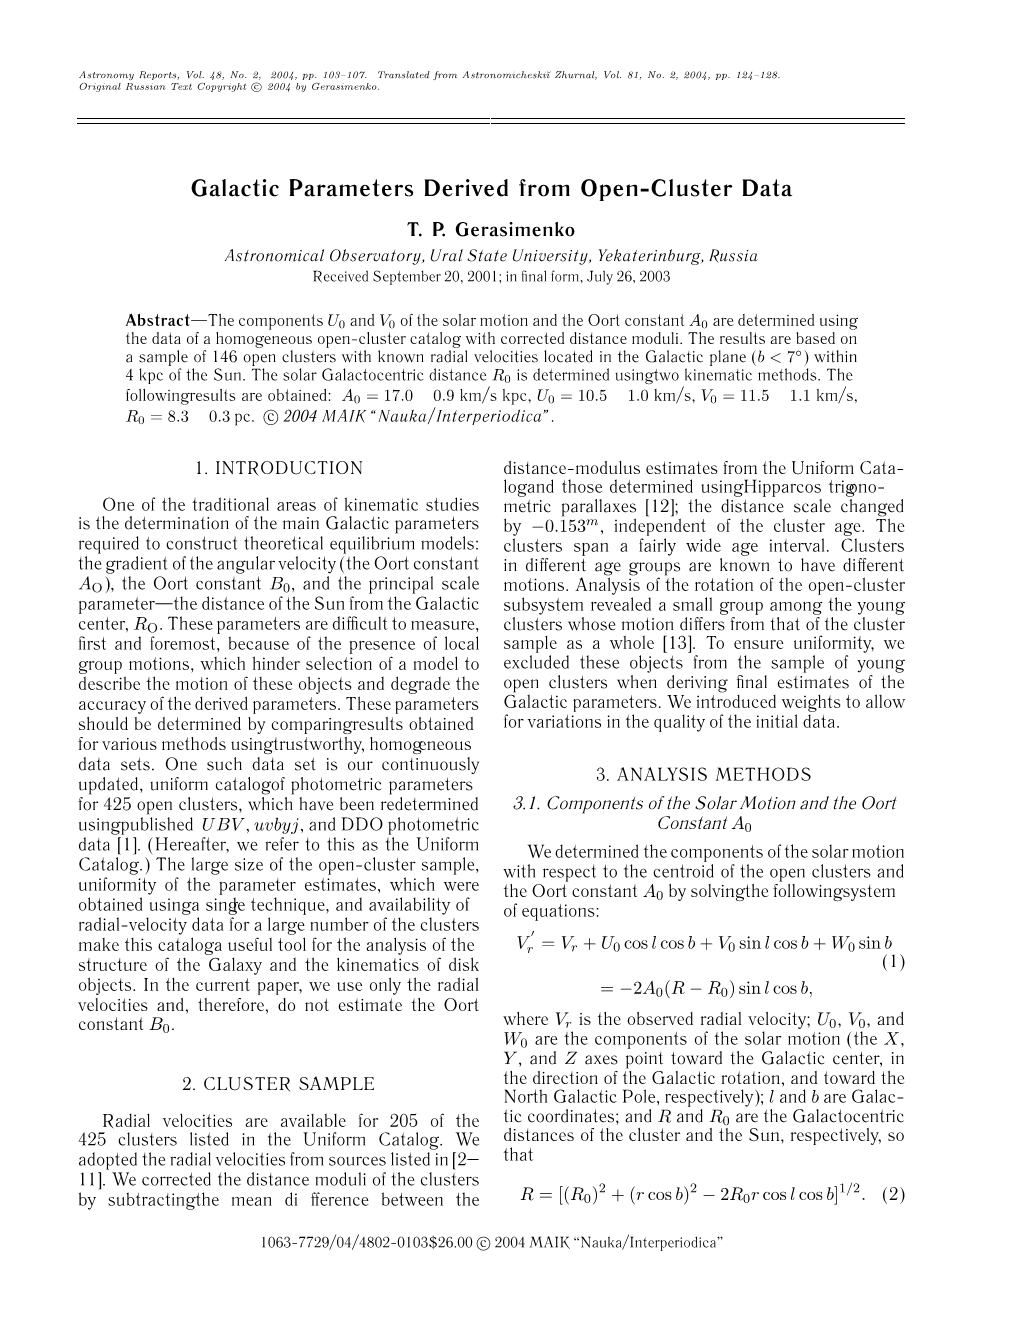 Galactic Parameters Derived from Open-Cluster Data T